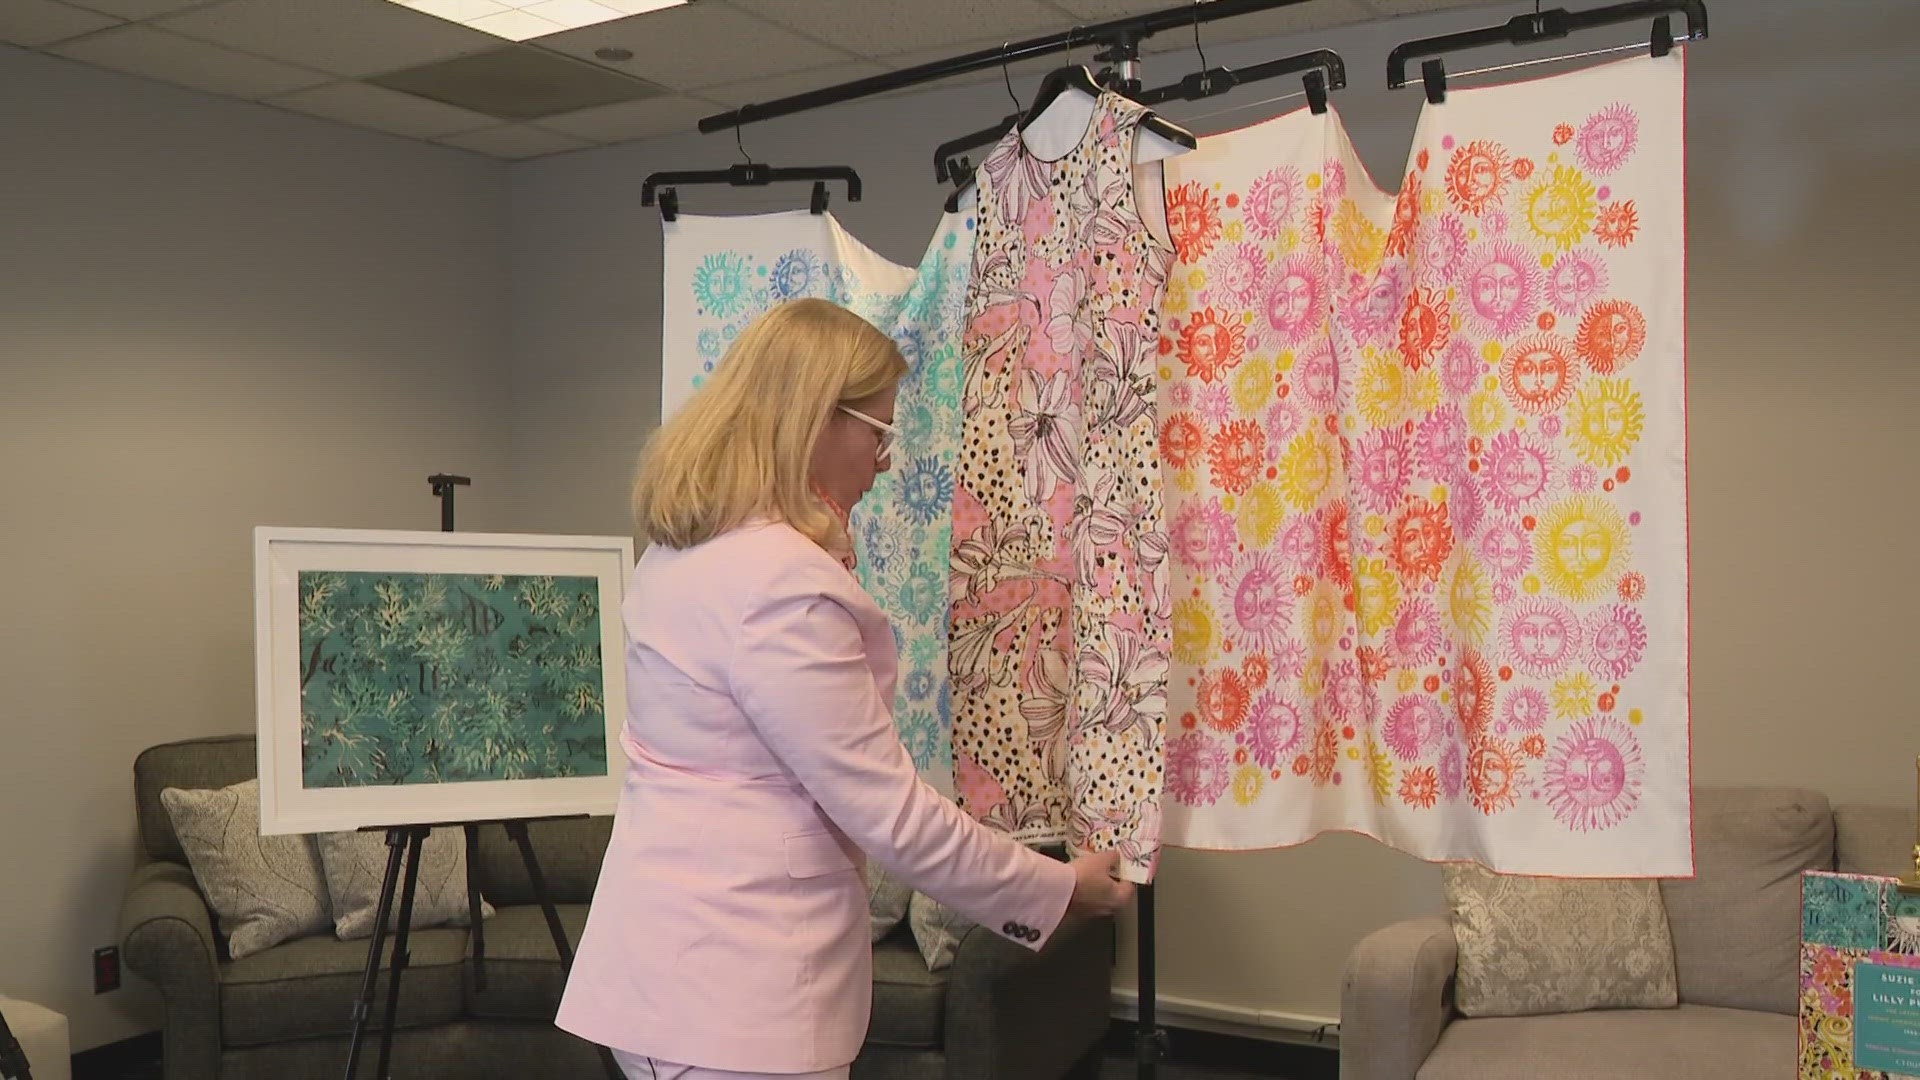 A St. Louis mom discovered that there was an artist named Suzie Zuzek who inspired and created thousands of designs for Lilly Pulitzer.